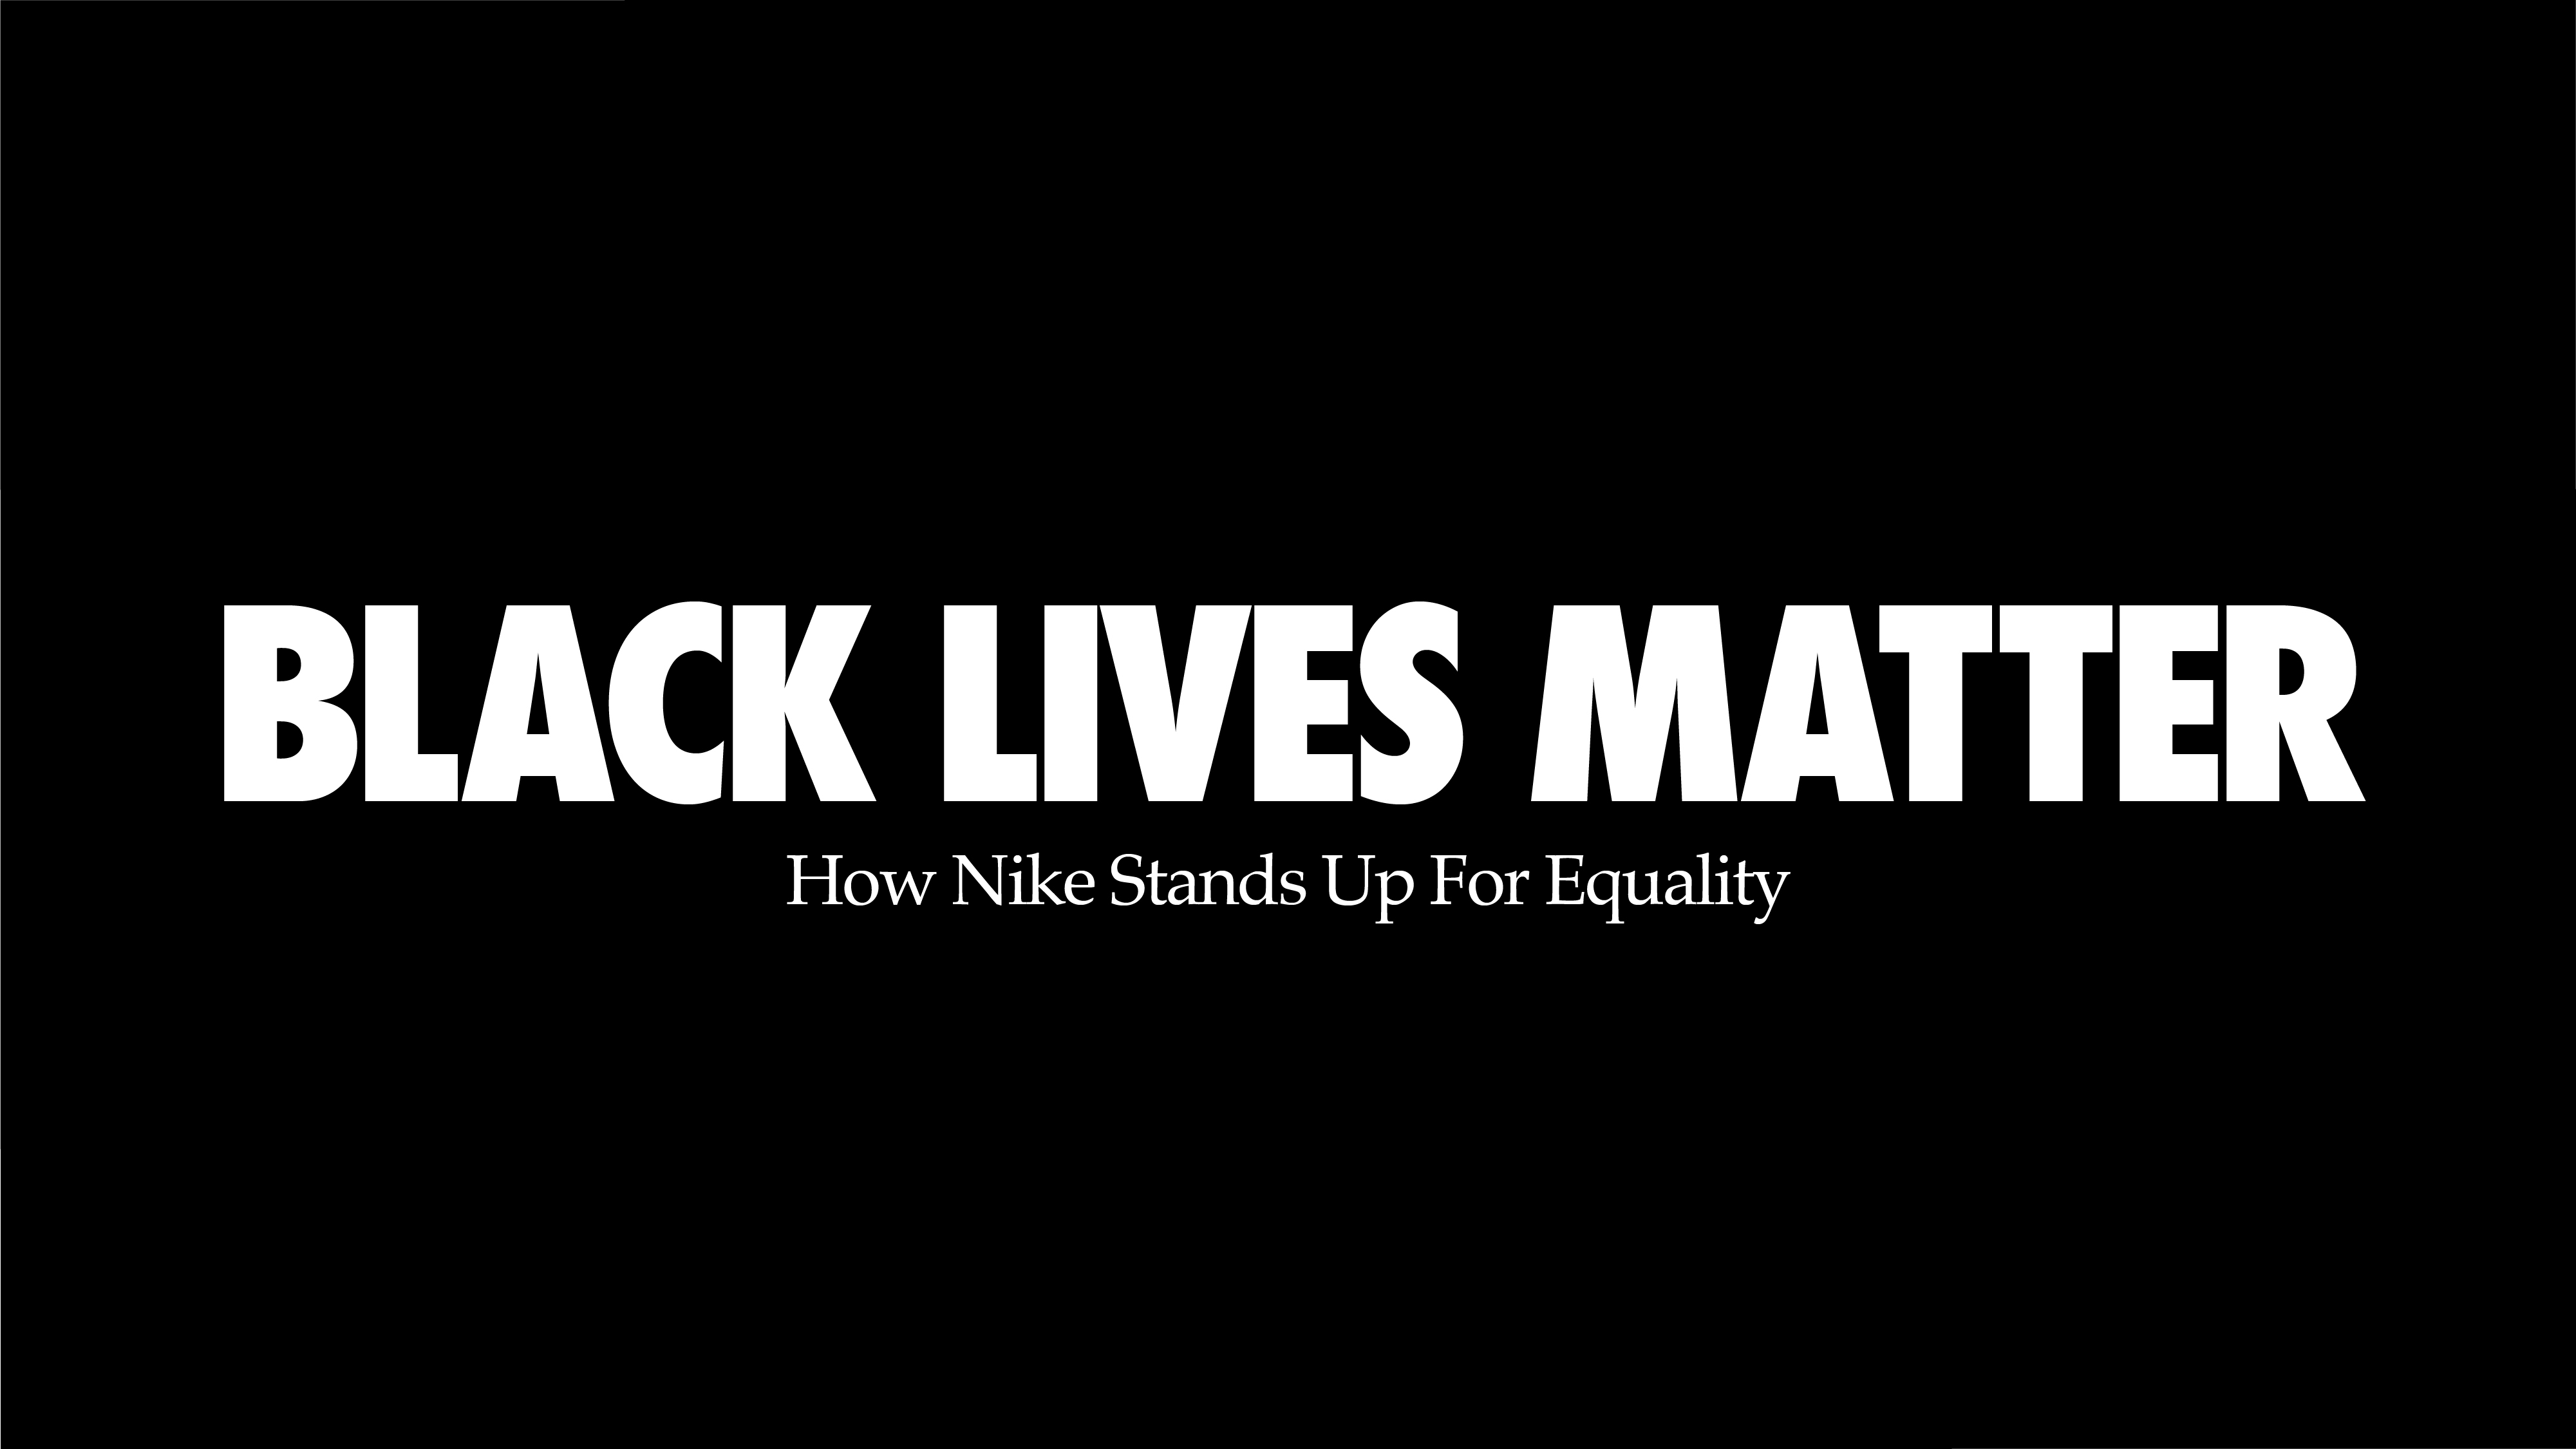 Nike on Twitter: "We will continue to stand up for equality and work to down barriers for athletes* all over the world. For more information: https://t.co/CQvZhwEYFT https://t.co/ekOaUM4qAA" / Twitter